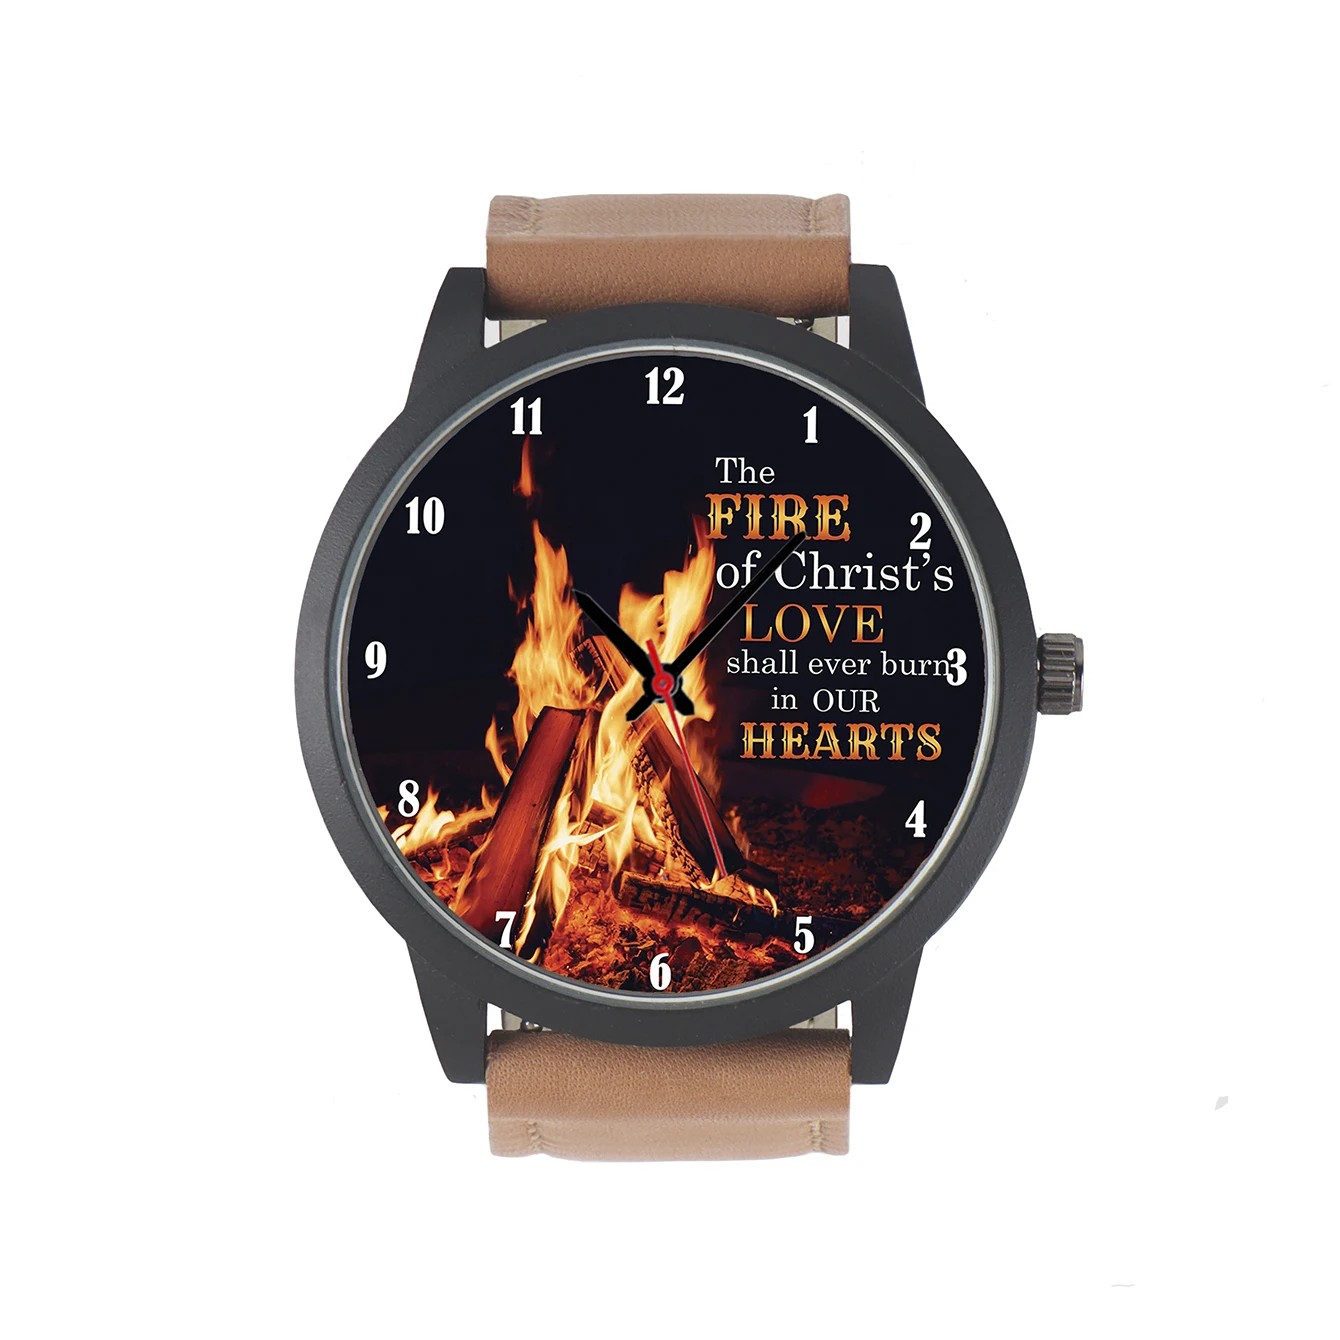 Free Shipping Factory Store Fire Design Christ's Love Gifts For followers of Christianity Men's Battery Quartz Wrist Watch free shipping 28m capricorn octopus kite flying soft kite weifang kite factory walk in sky parachute kites ikite snake air